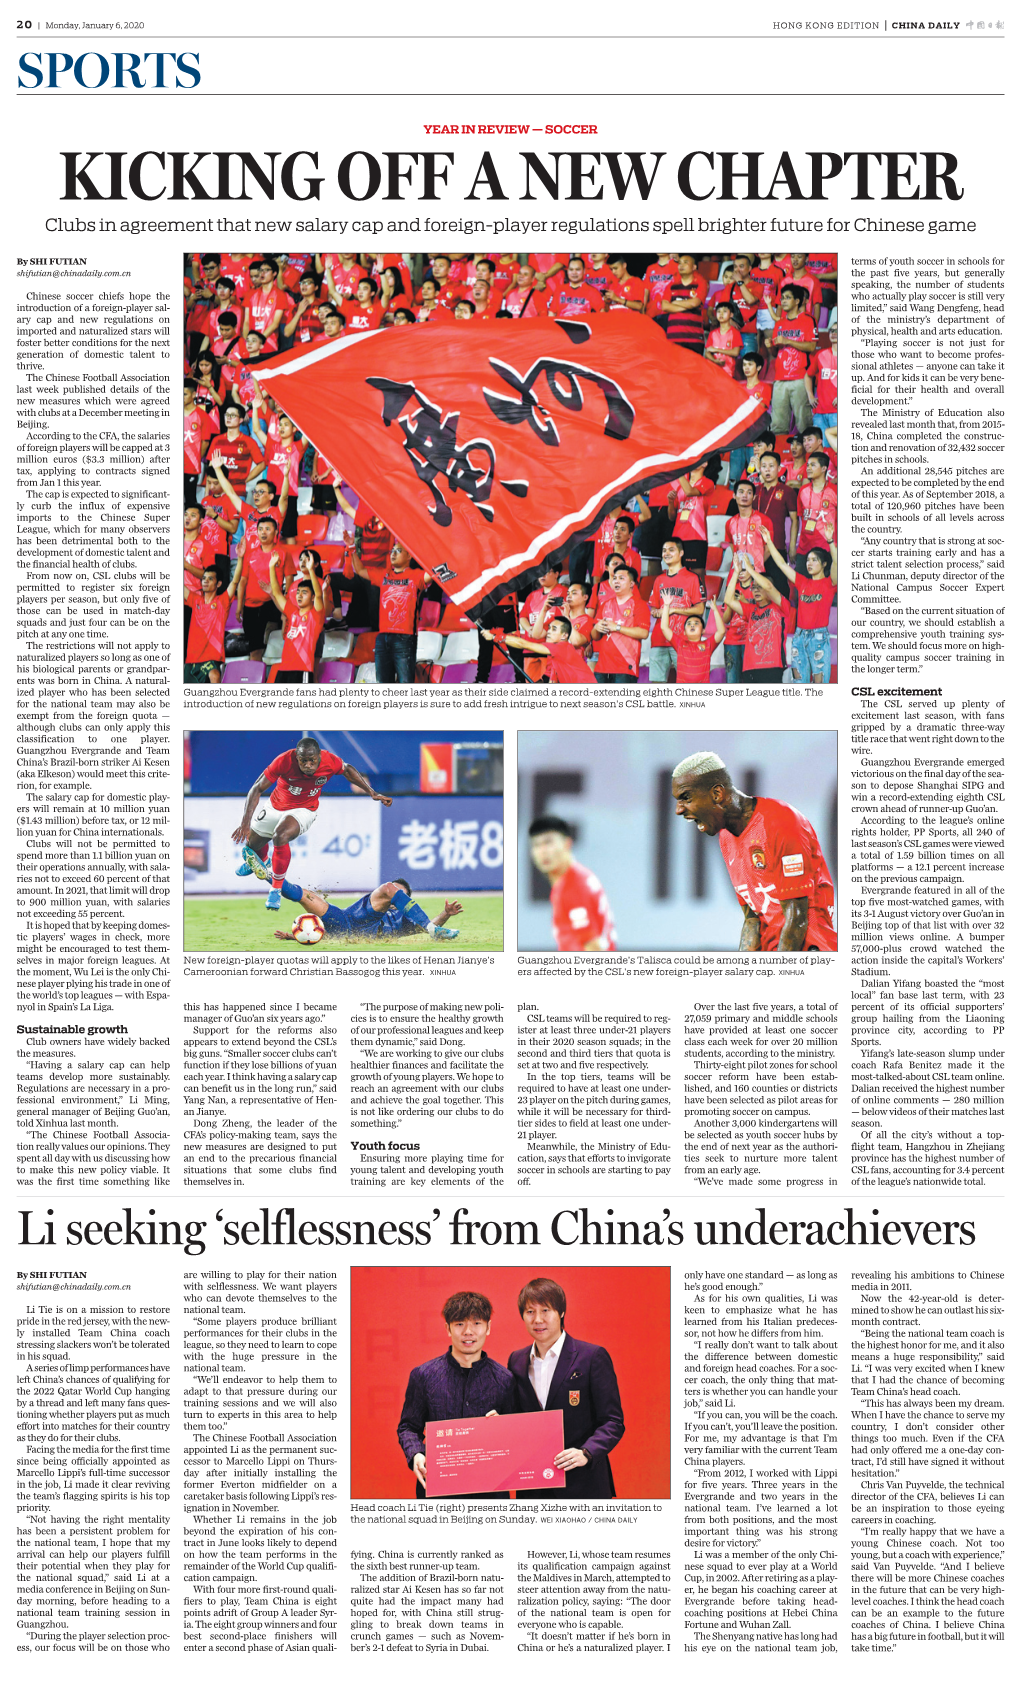 KICKING OFF a NEW CHAPTER Clubs in Agreement That New Salary Cap and Foreign­Player Regulations Spell Brighter Future for Chinese Game